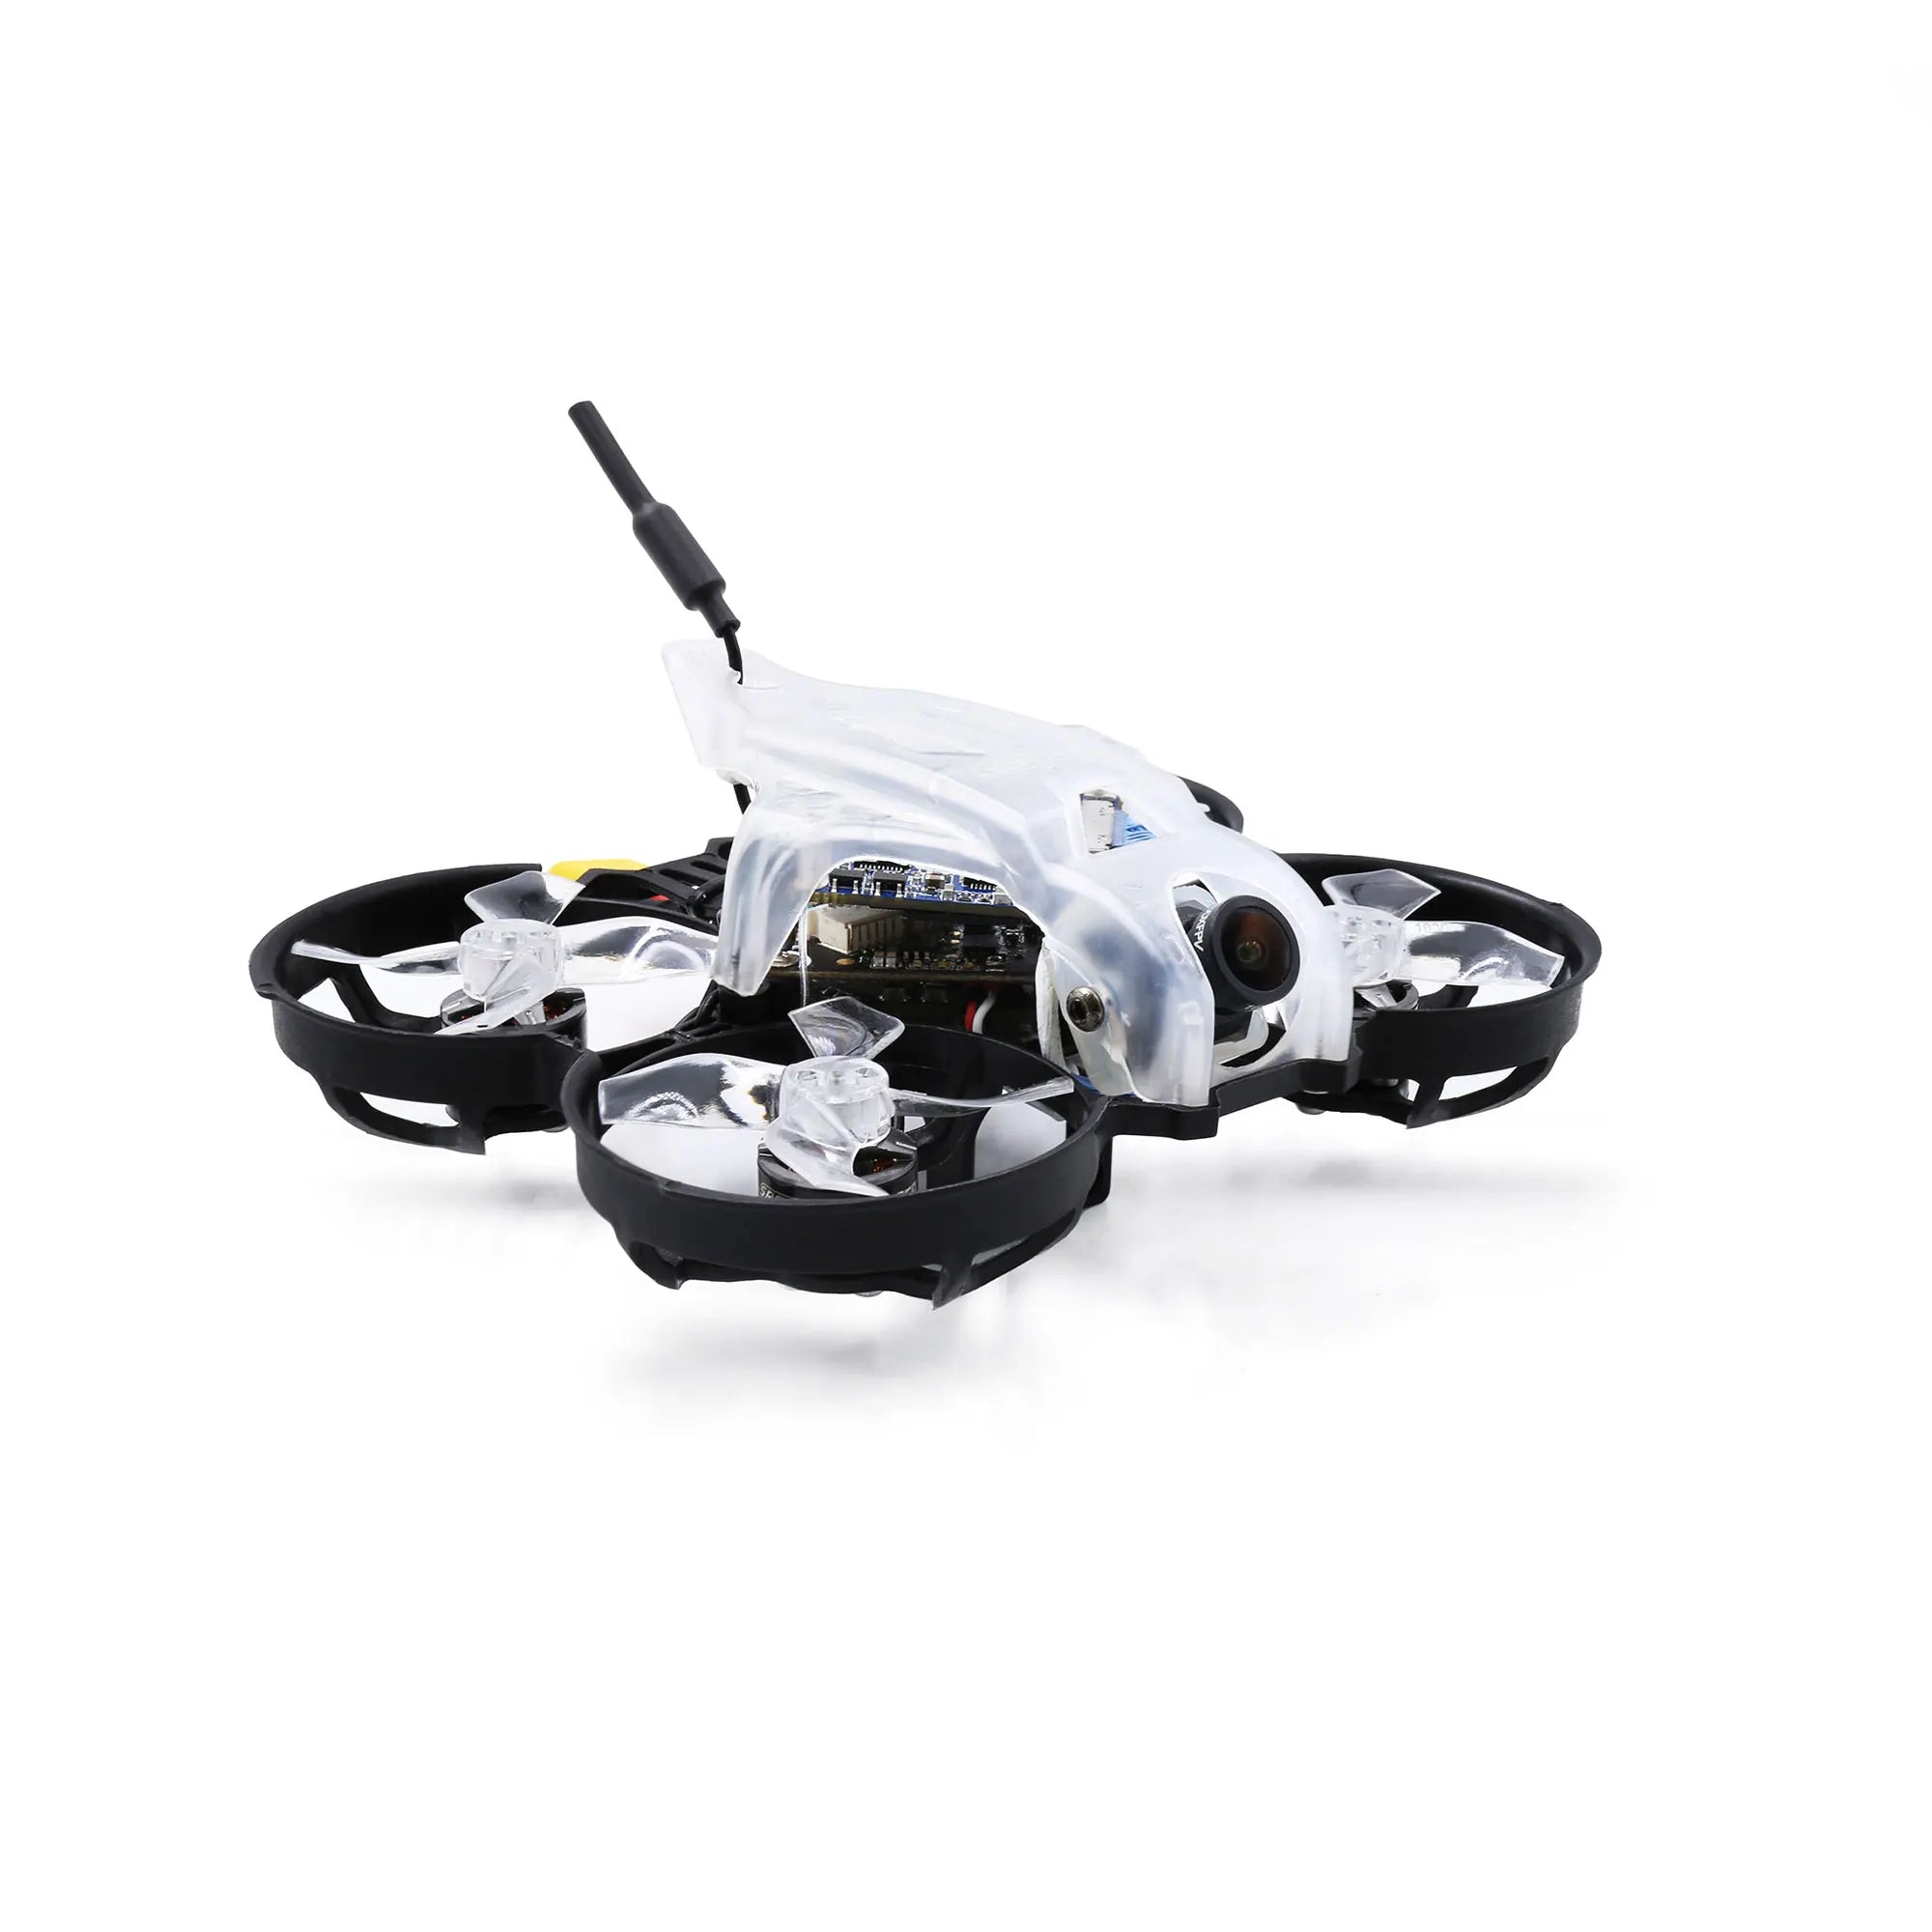 GEPRC Thinking P16 FPV Drone, Build-in Caddx Loris 4K 60fps Whoop style frame